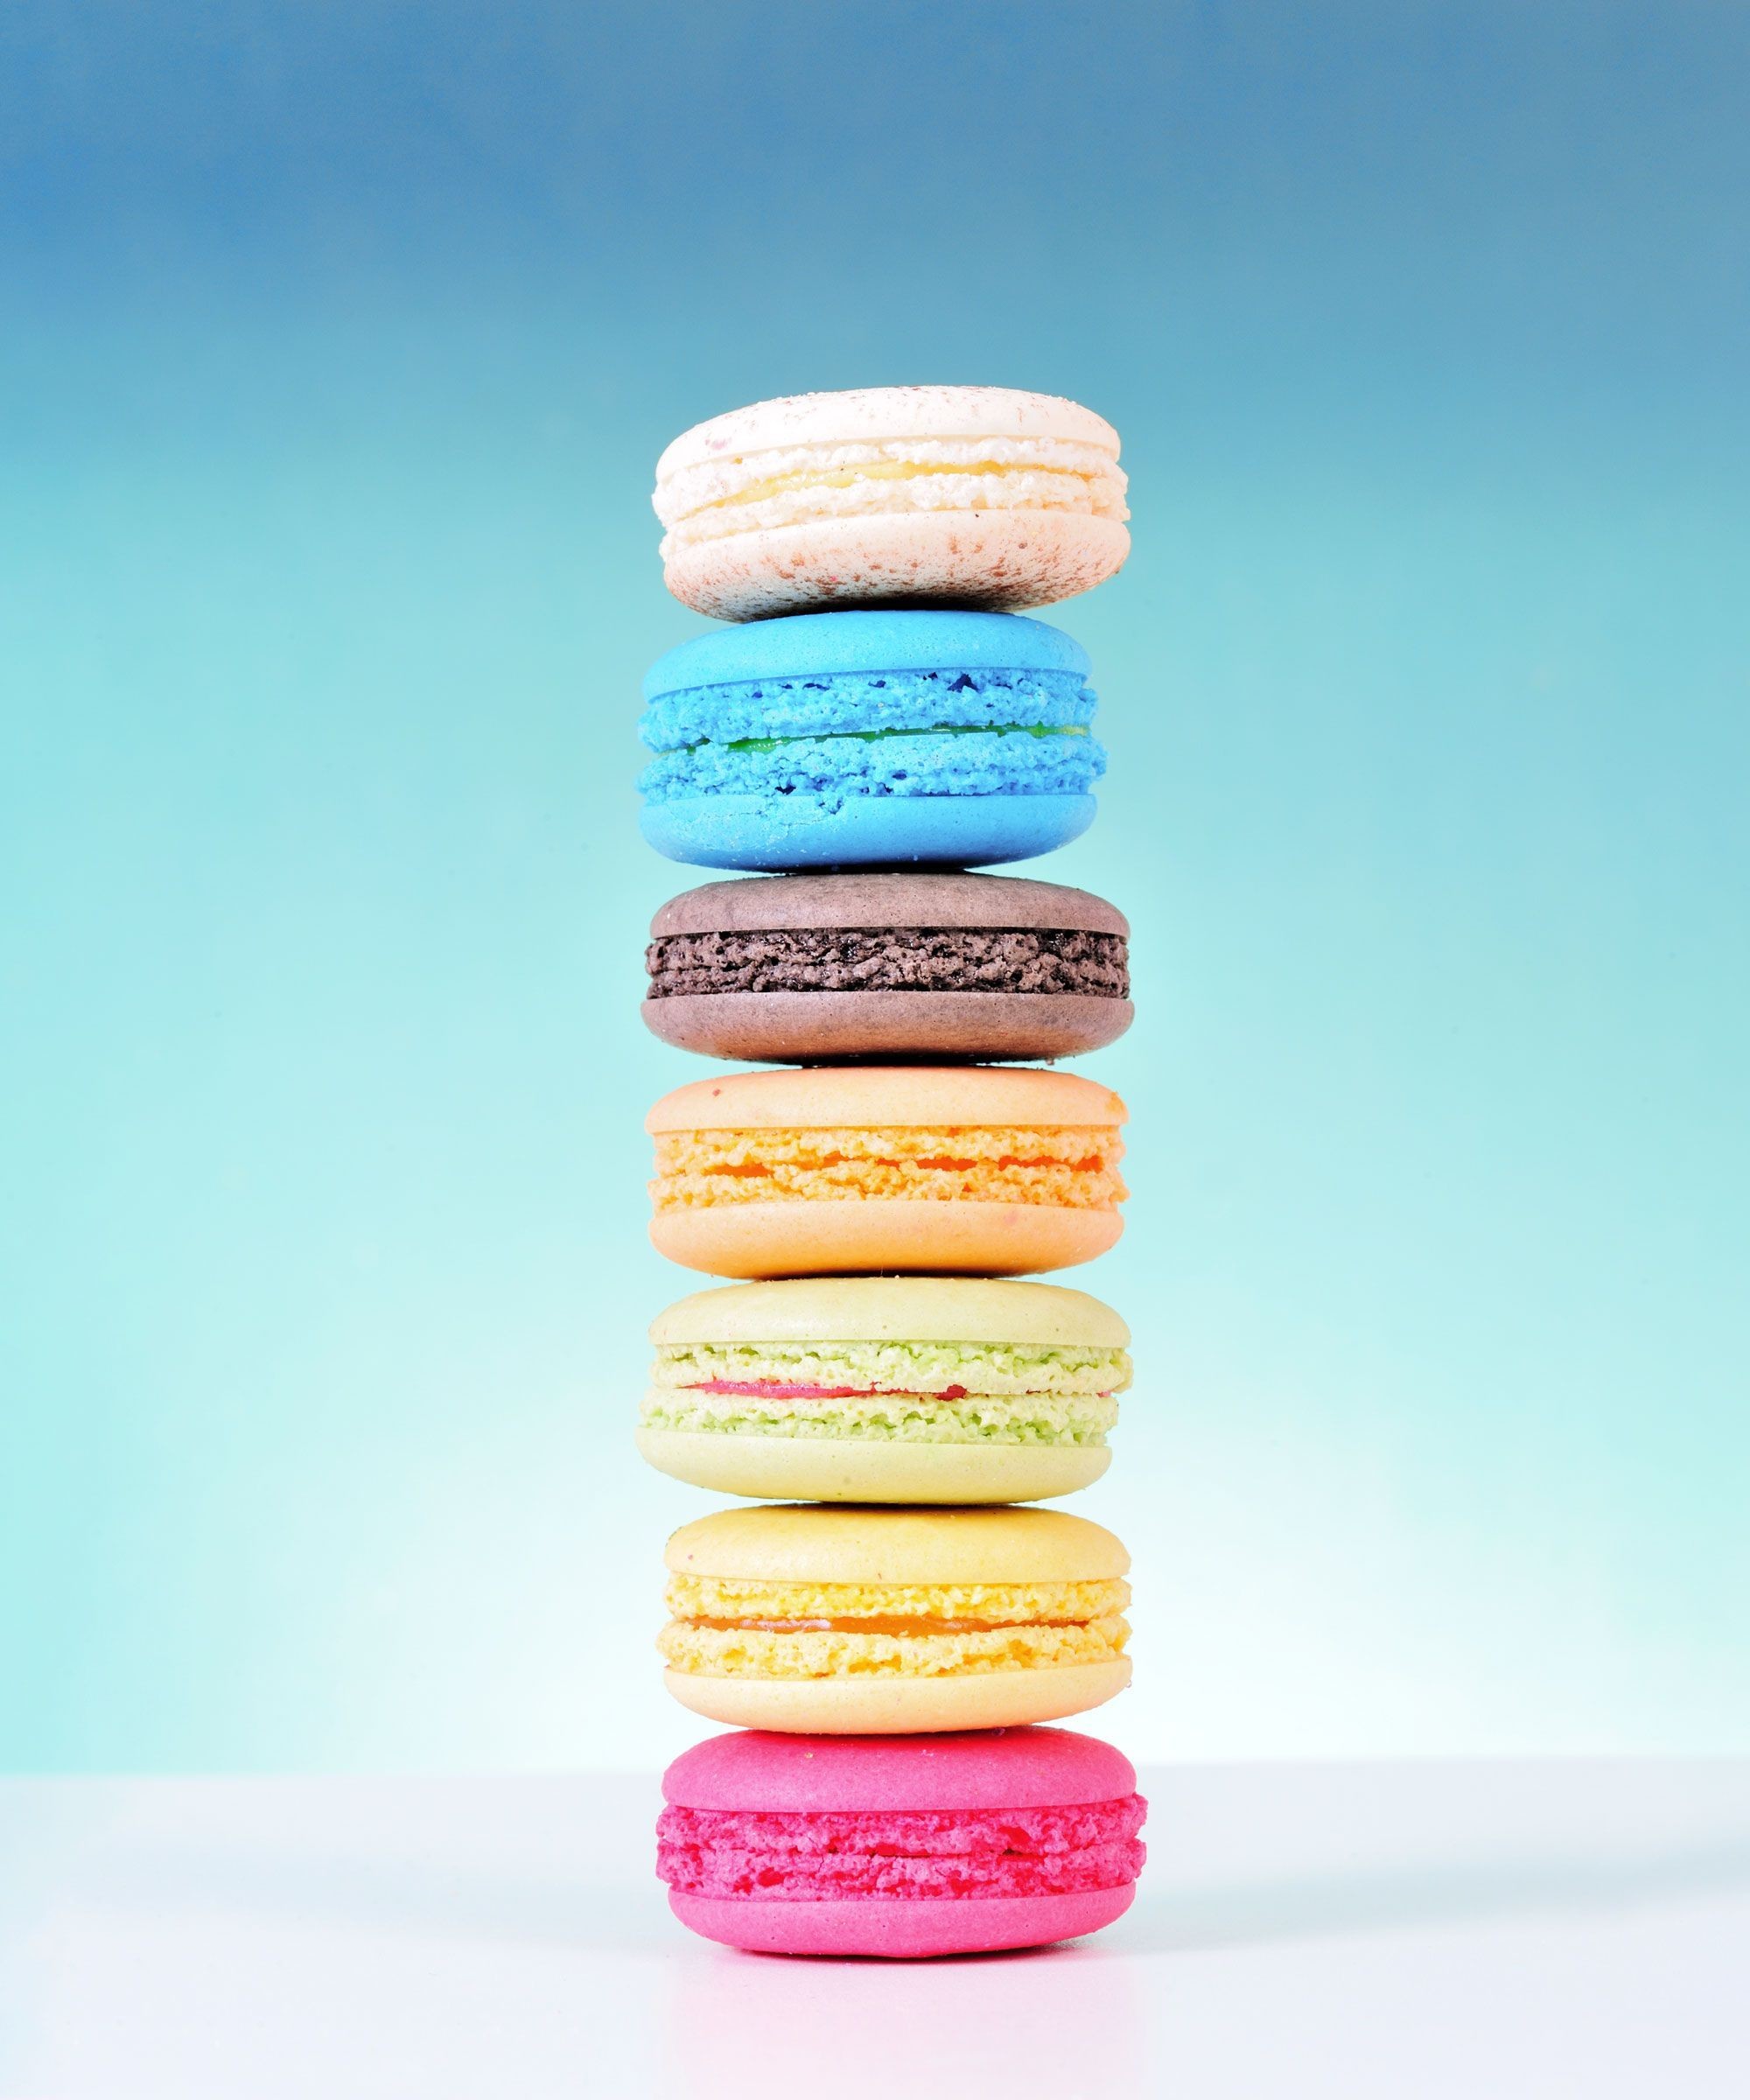 2000x2400 Best Macaron Recipe - How To Make Macarons | These are the best macaron  recipes on